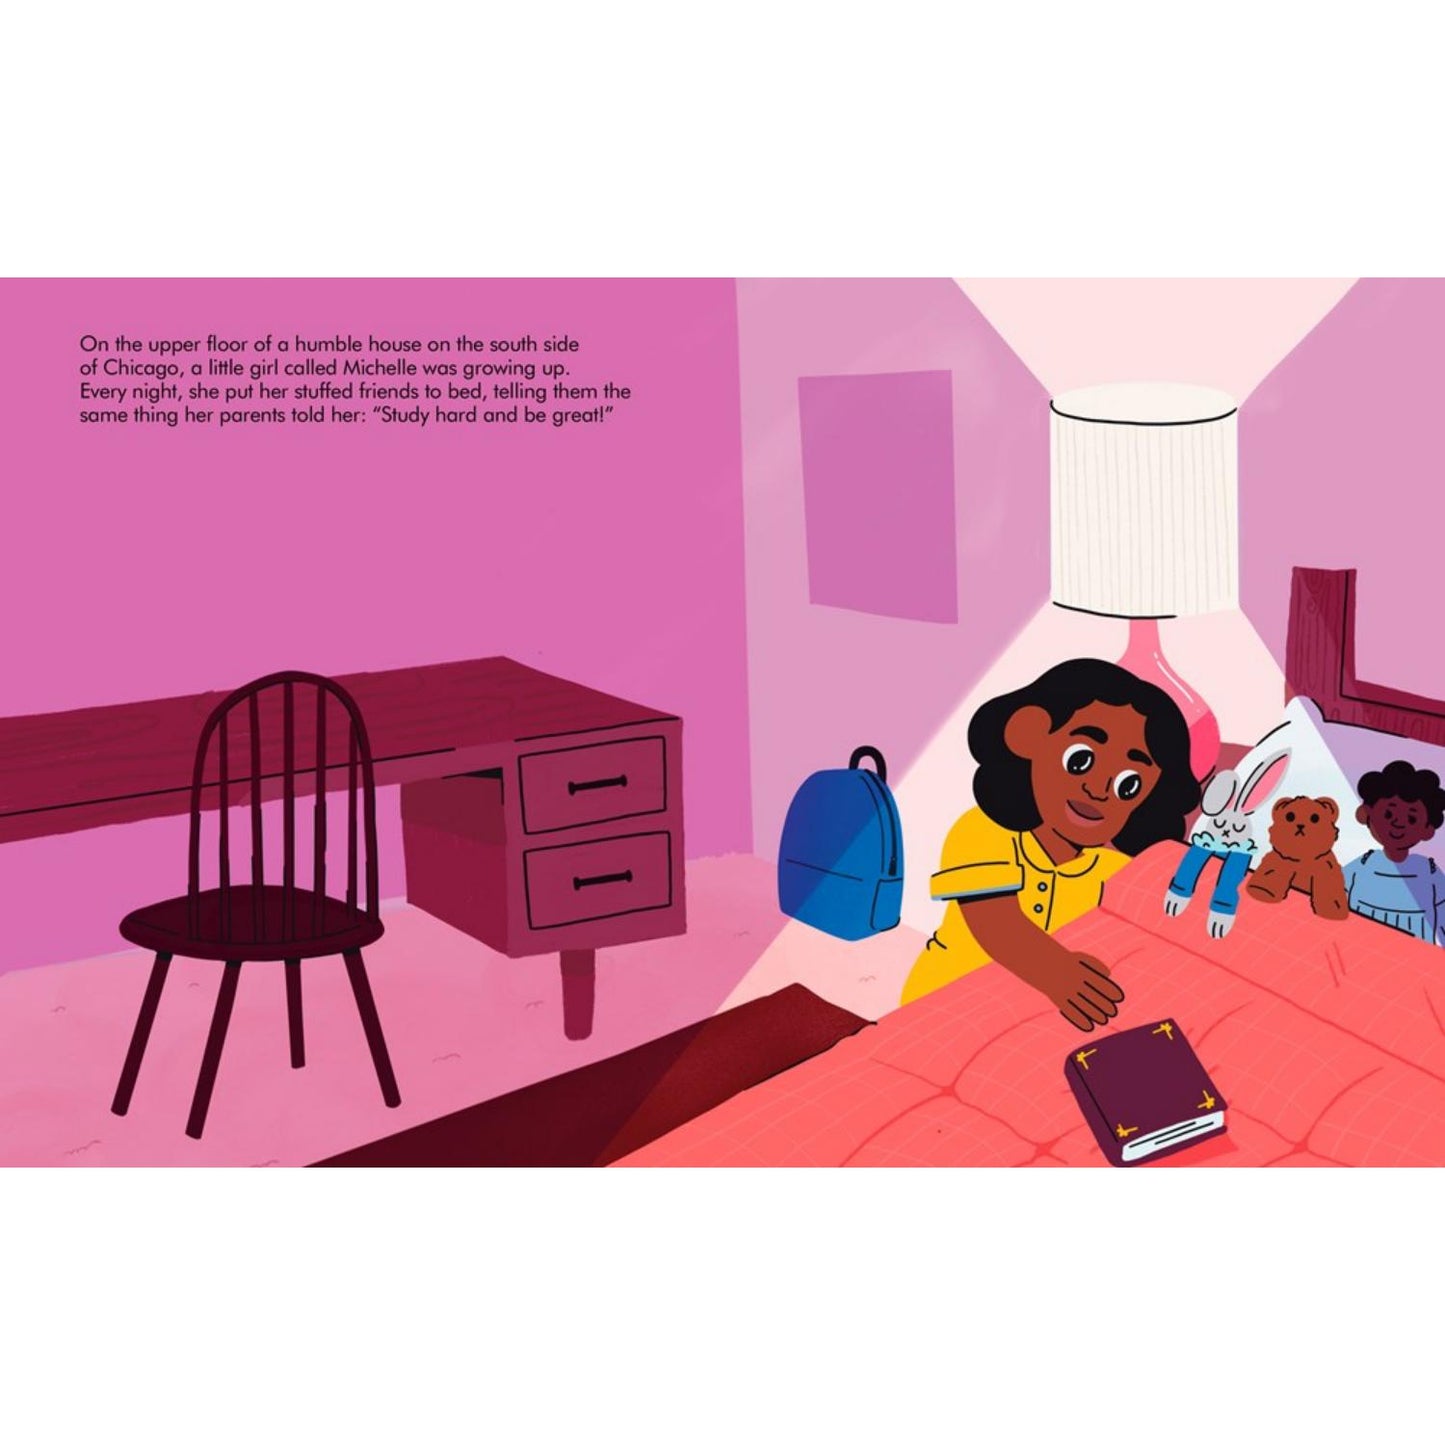 Michelle Obama | Little People, BIG DREAMS | Children’s Book on Biographies